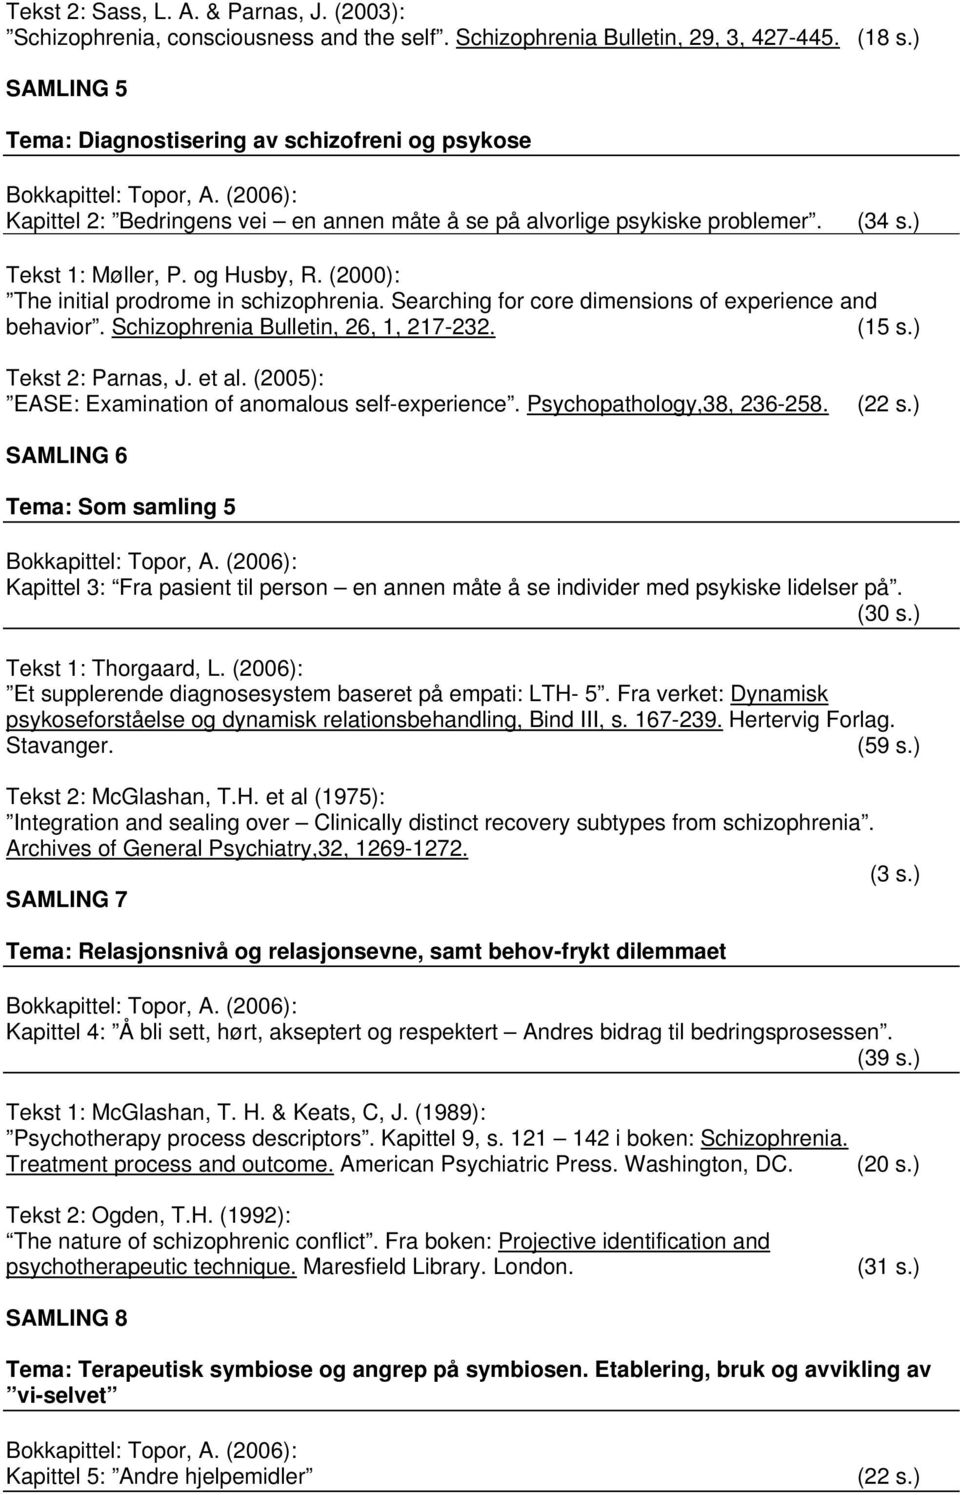 og Husby, R. (2000): The initial prodrome in schizophrenia. Searching for core dimensions of experience and behavior. Schizophrenia Bulletin, 26, 1, 217-232. (15 s.) Tekst 2: Parnas, J. et al.